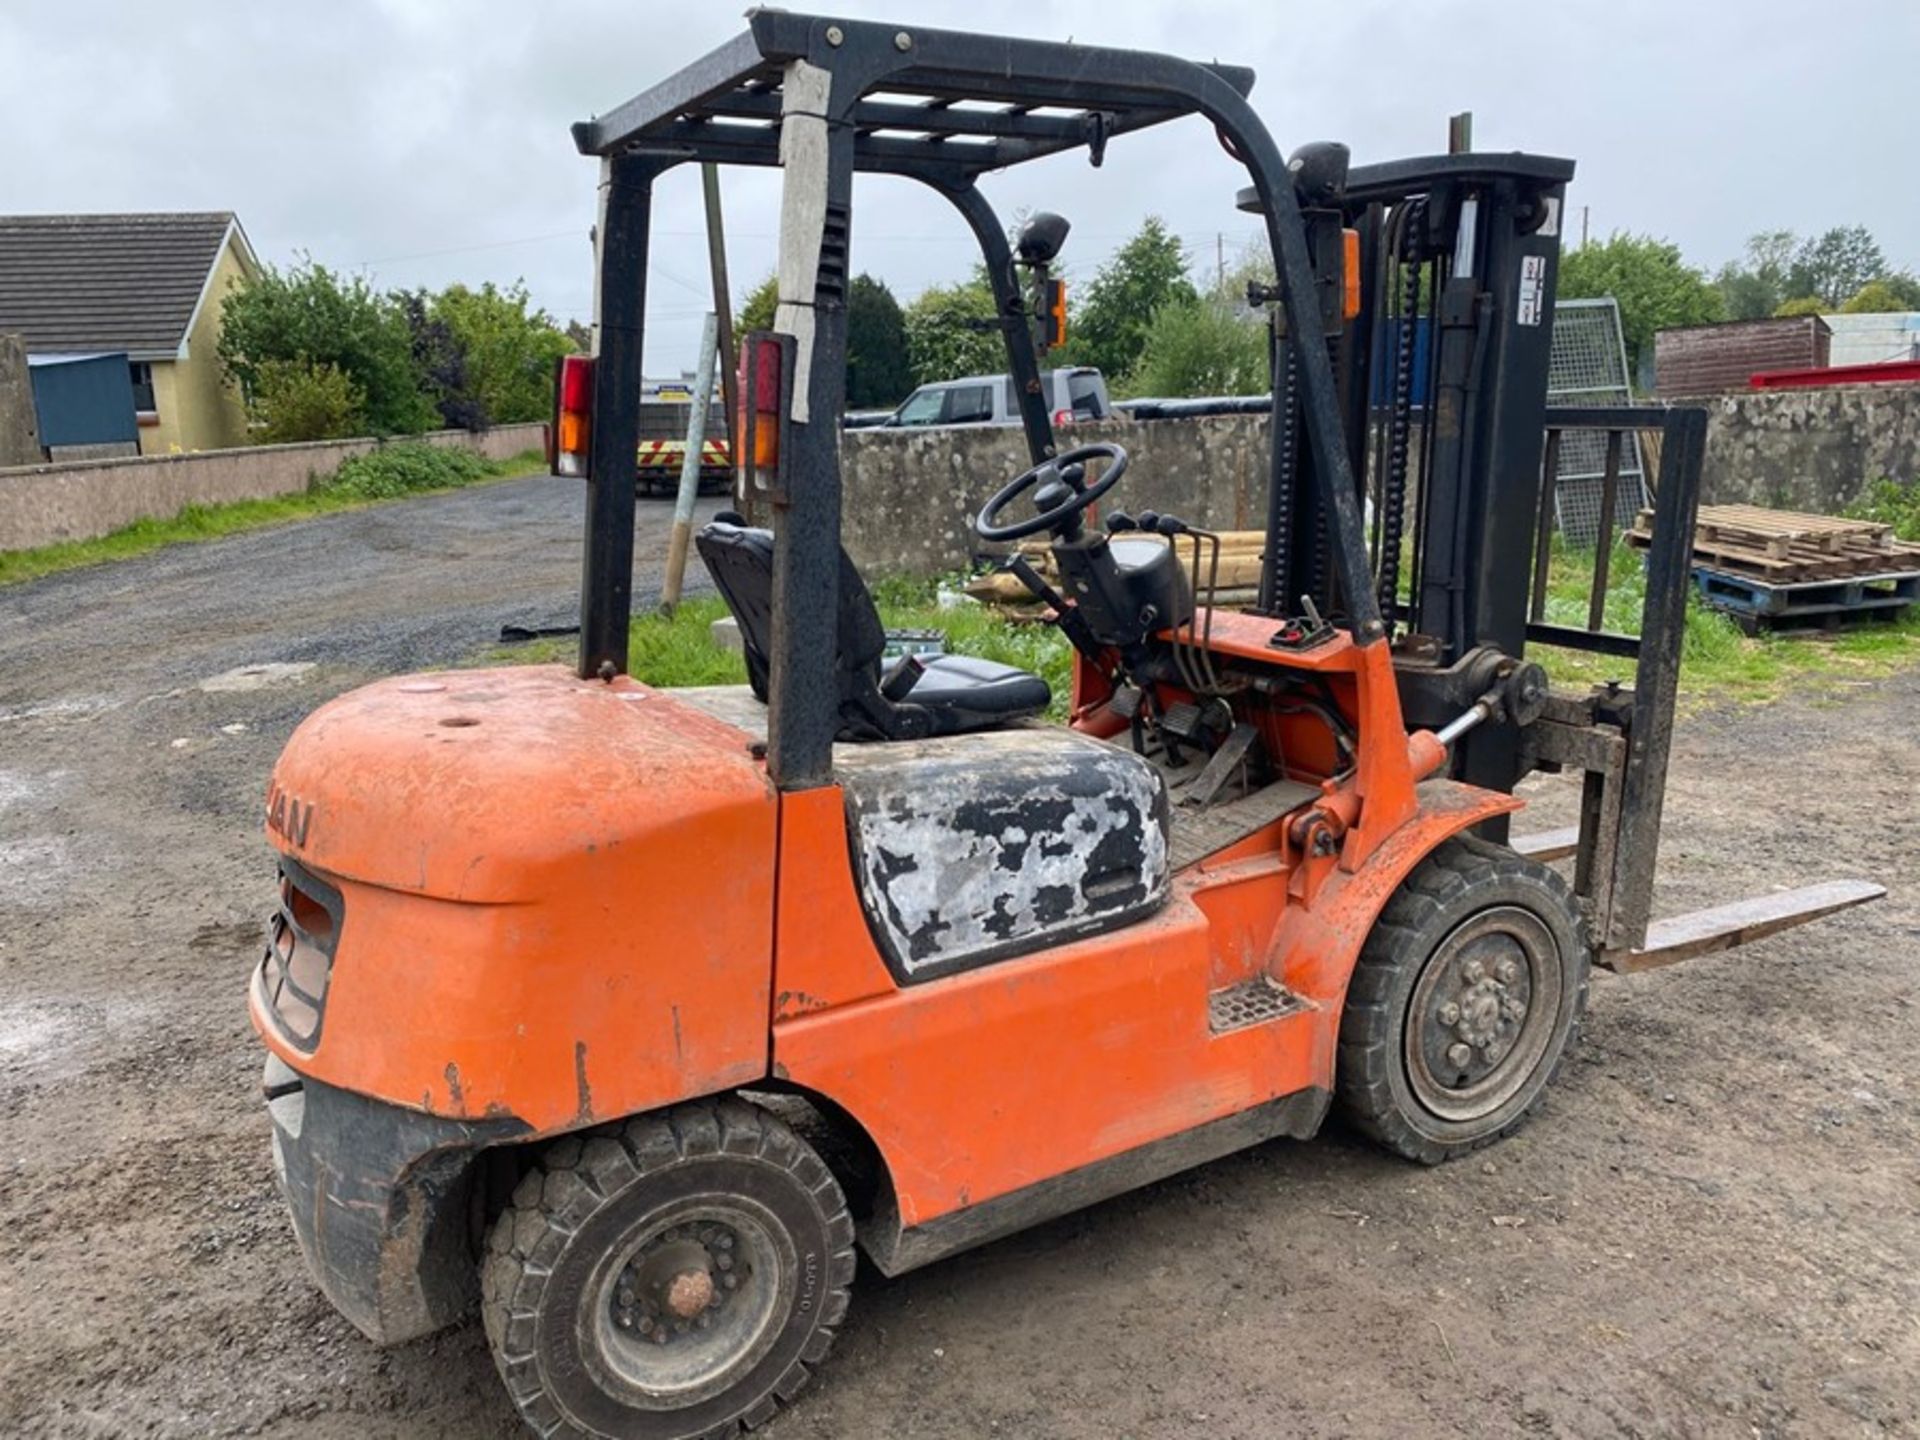 DALIAN 3TONNE FORKLIFT 904 HOURS C/W NEW SOLID BACK WHEELS (RUNNING WELL) - Image 9 of 9